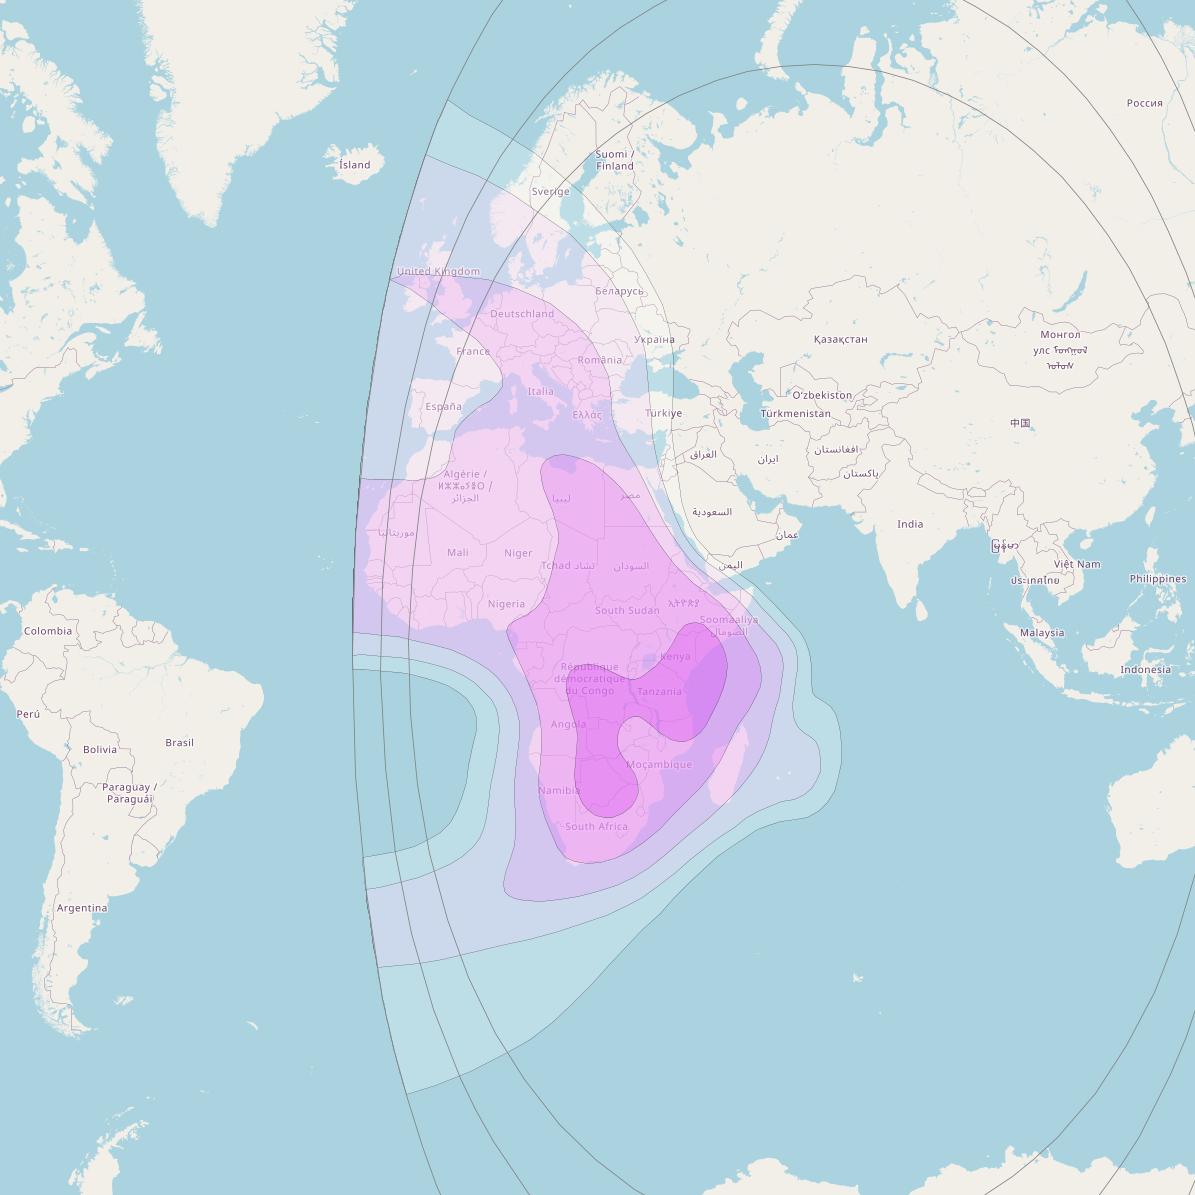 Intelsat 39 at 62° E downlink C-band West Hemi beam coverage map